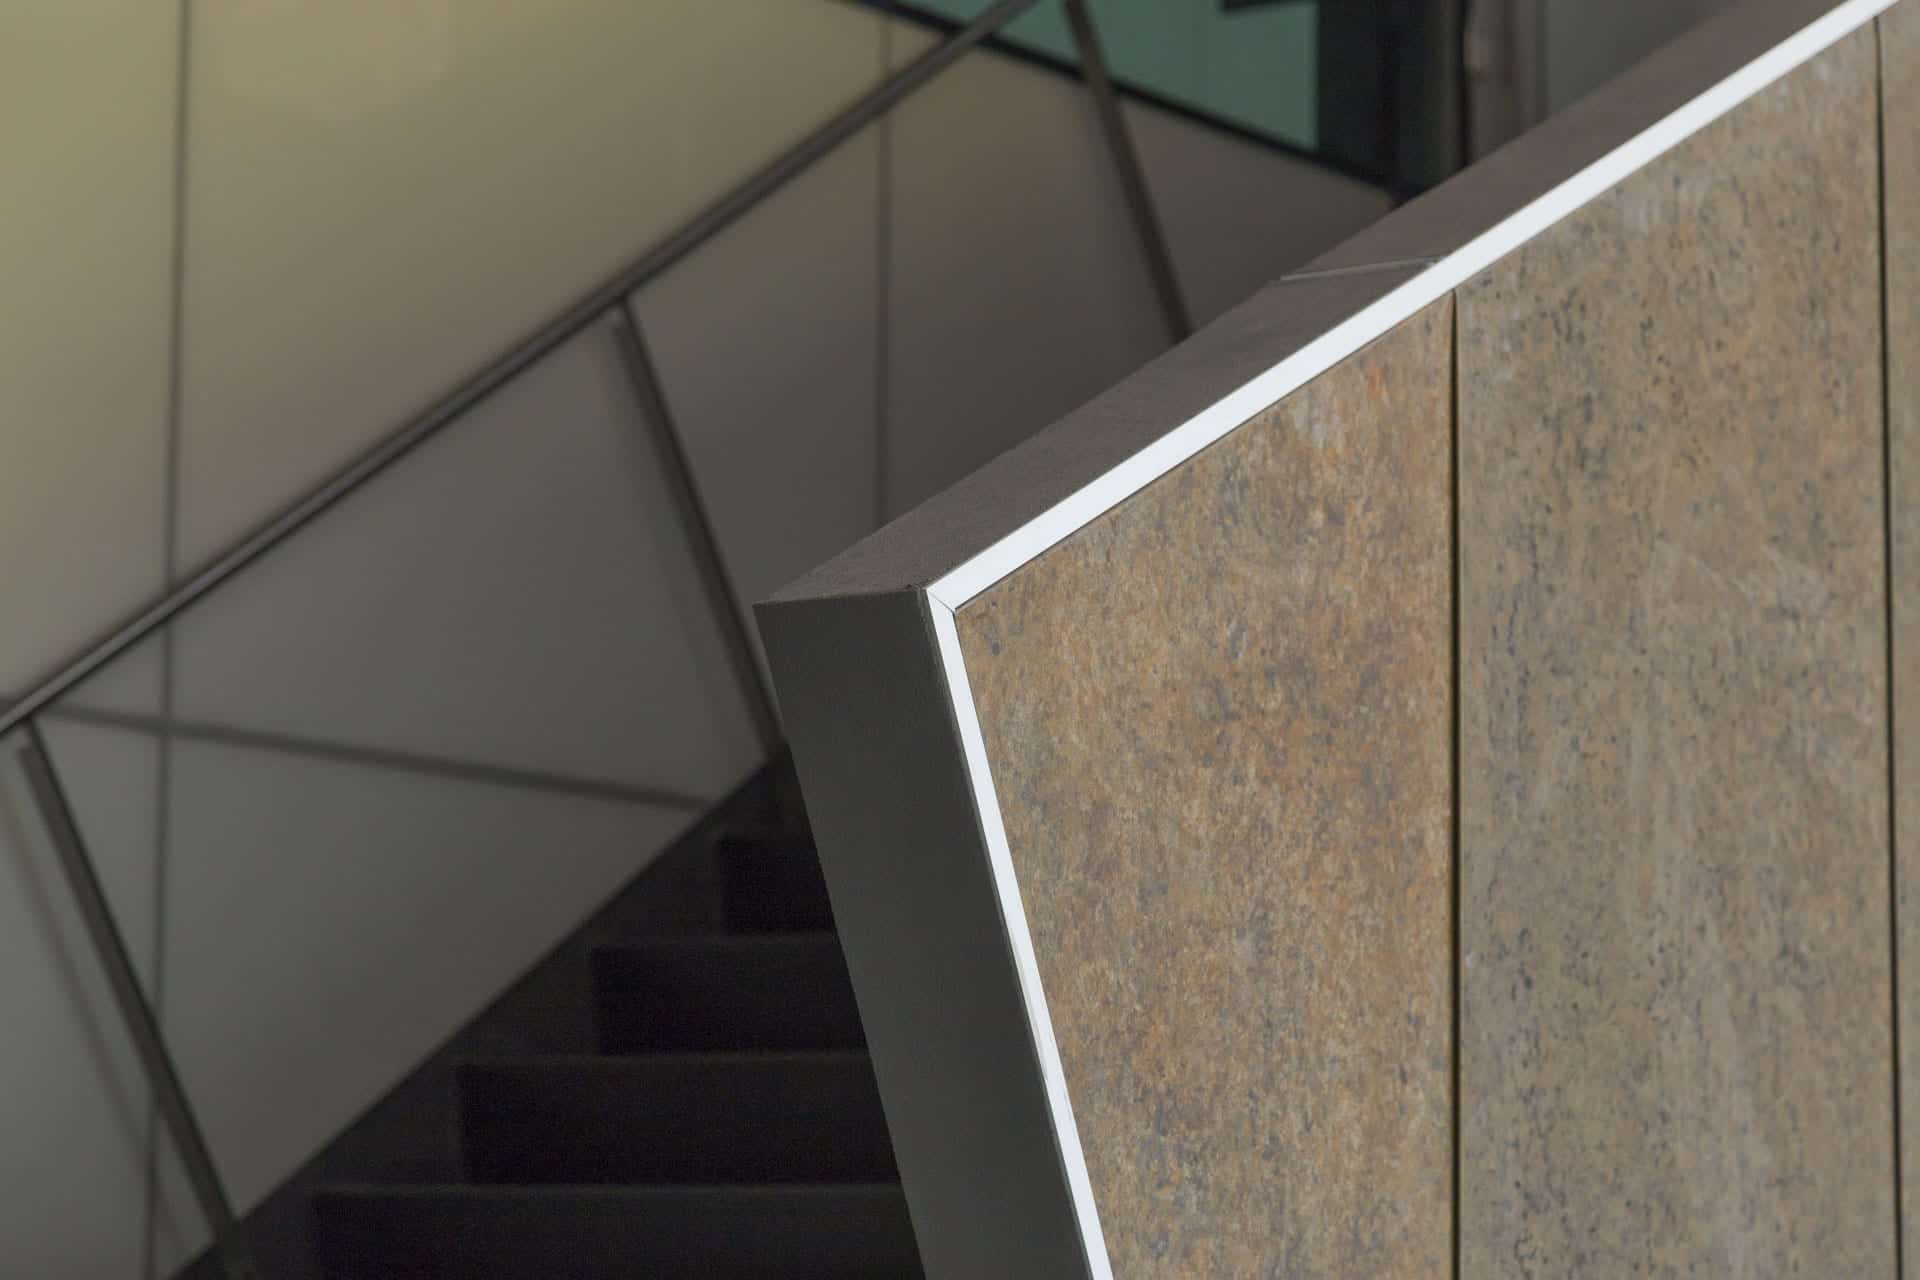 Detail of the custom zinc interior atrium staircase at the McMurtry Building in Stanford, California.